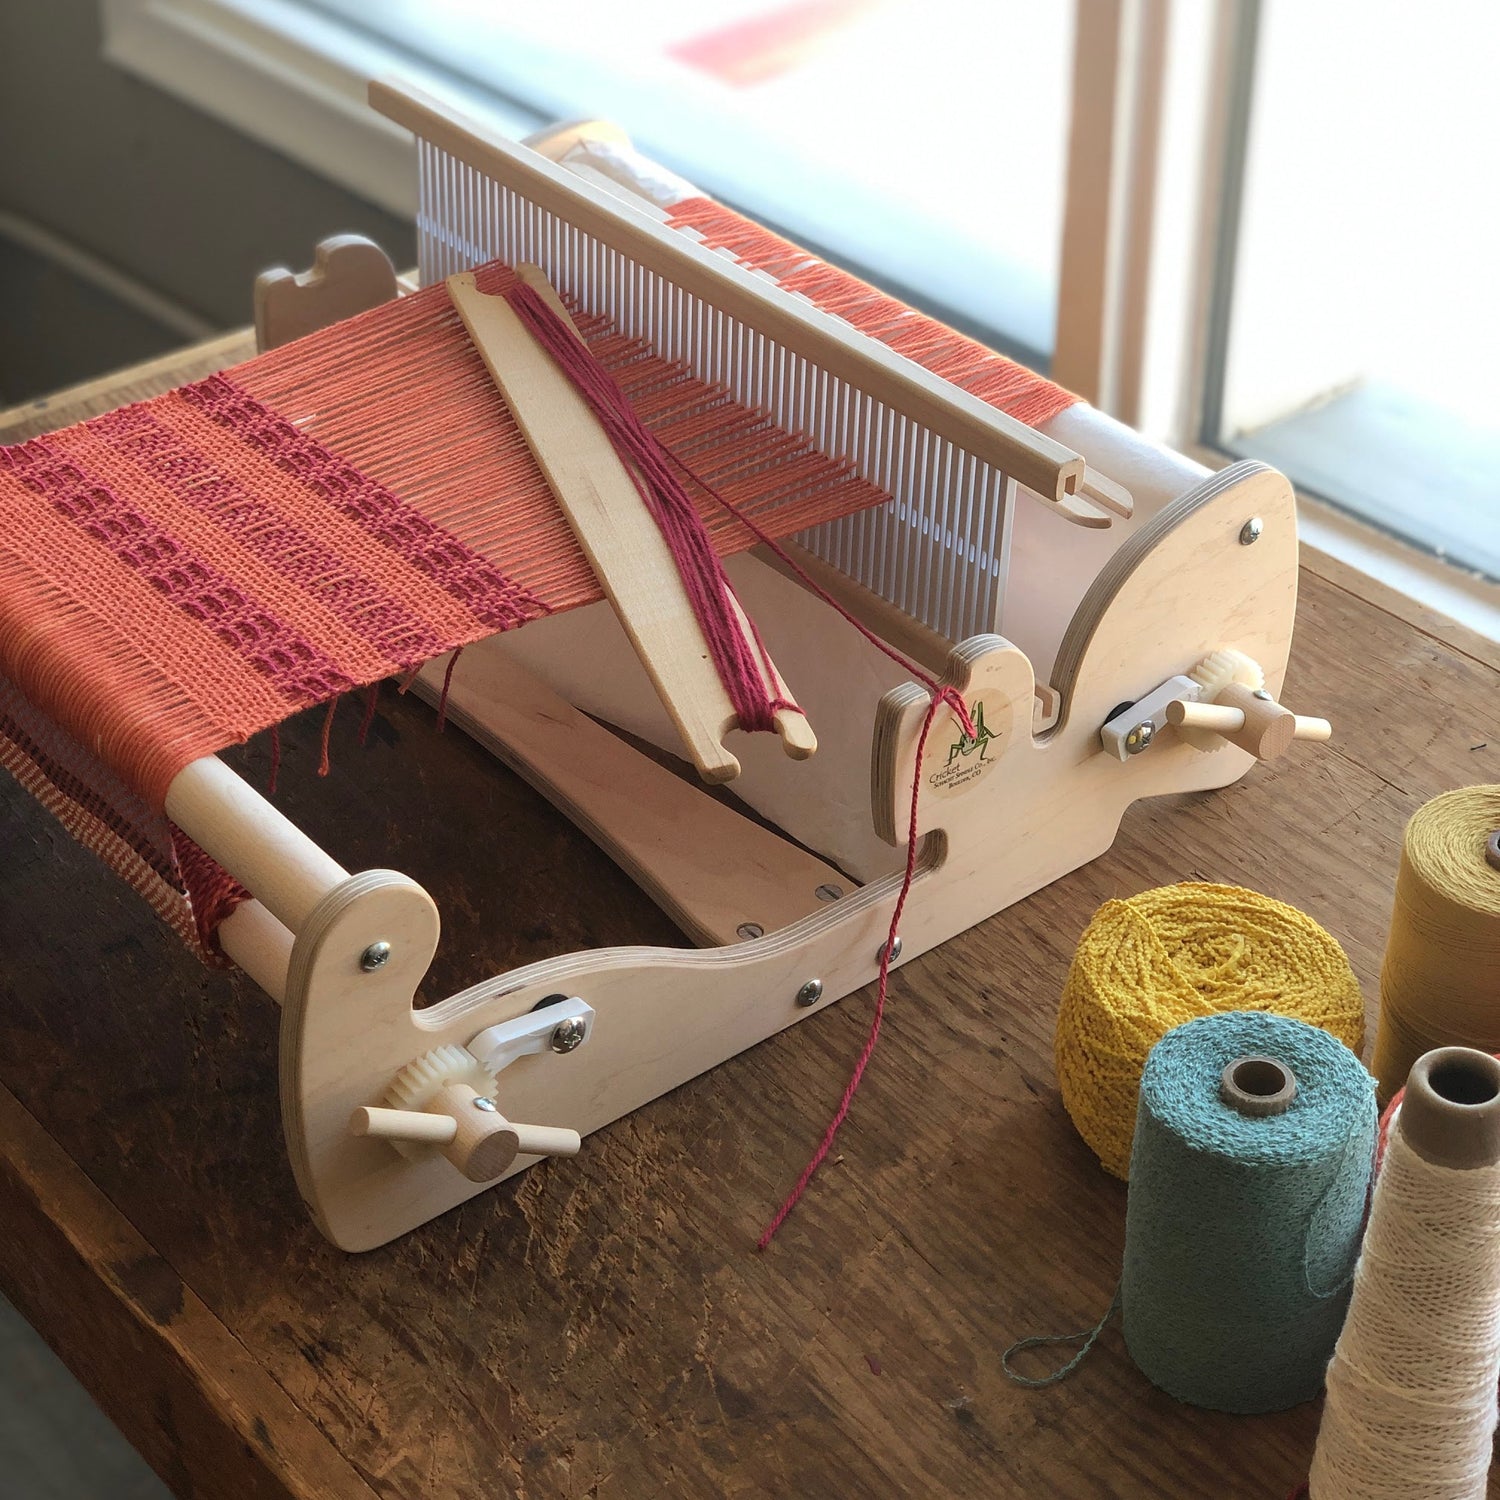 Where Can My Rigid Heddle Loom Take Me?